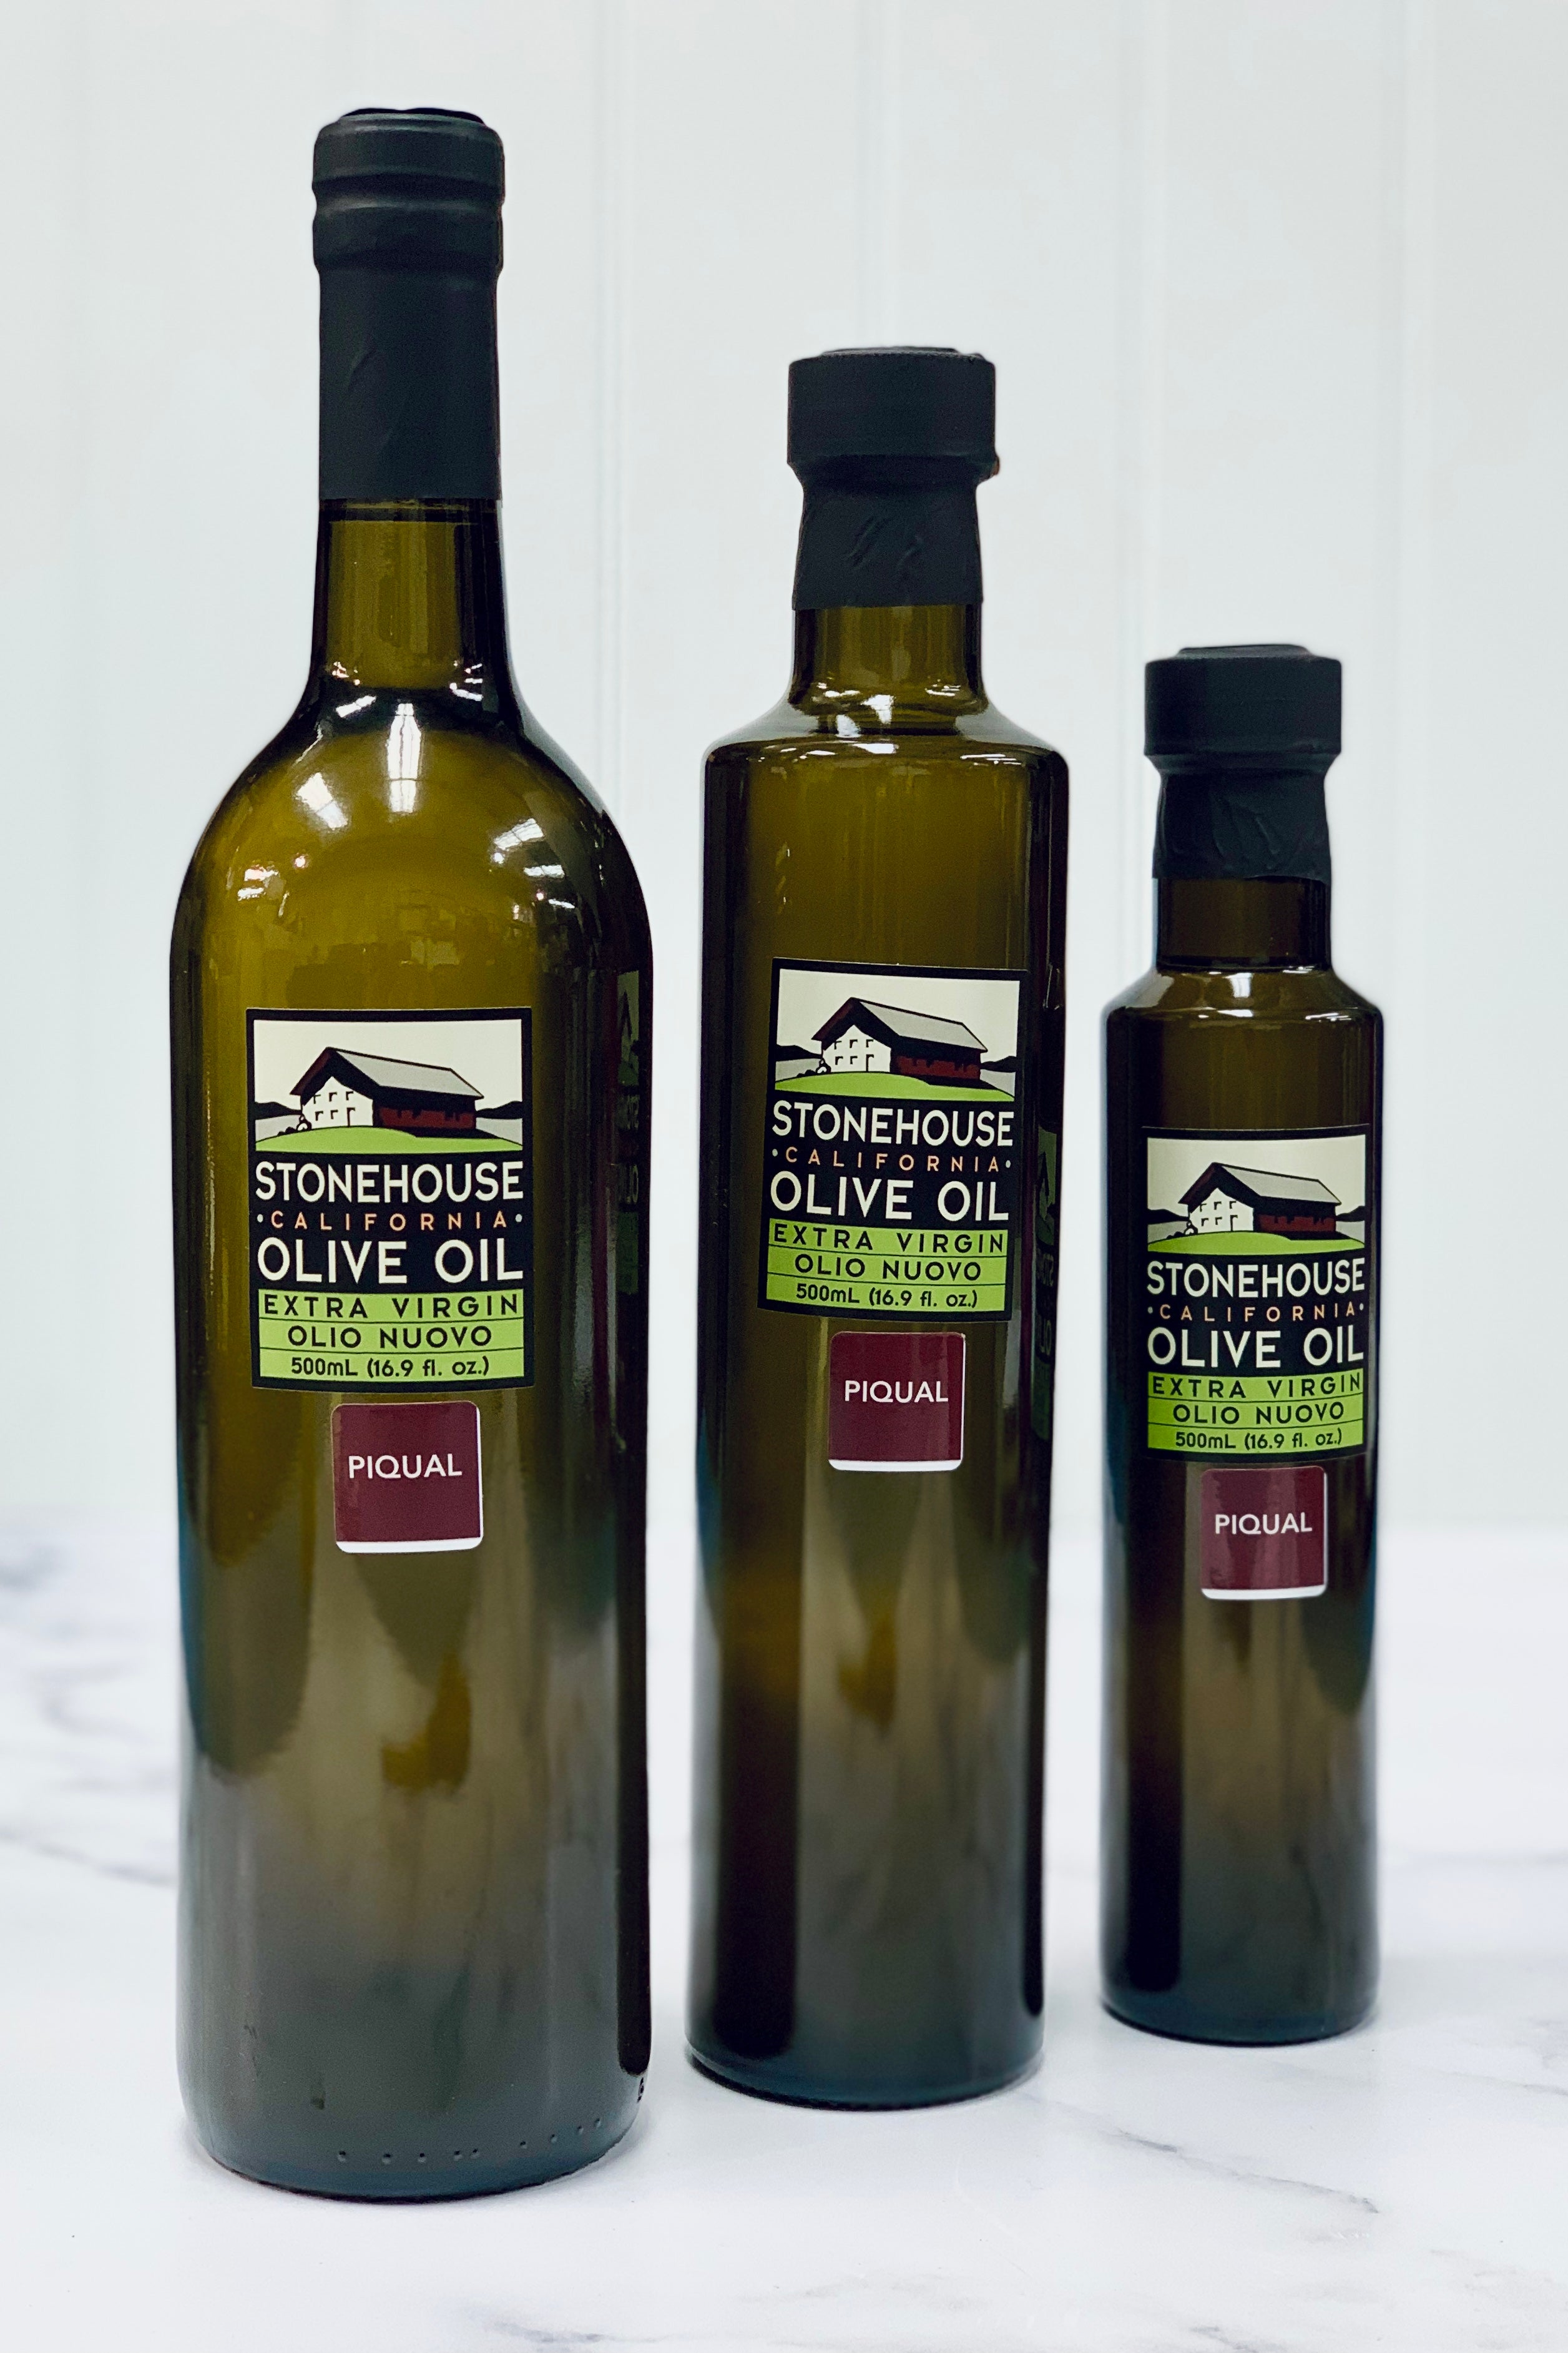 Download Stonehouse Olio Nuovo Piqual Extra Virgin Olive Oil Stonehouse Olive Oil